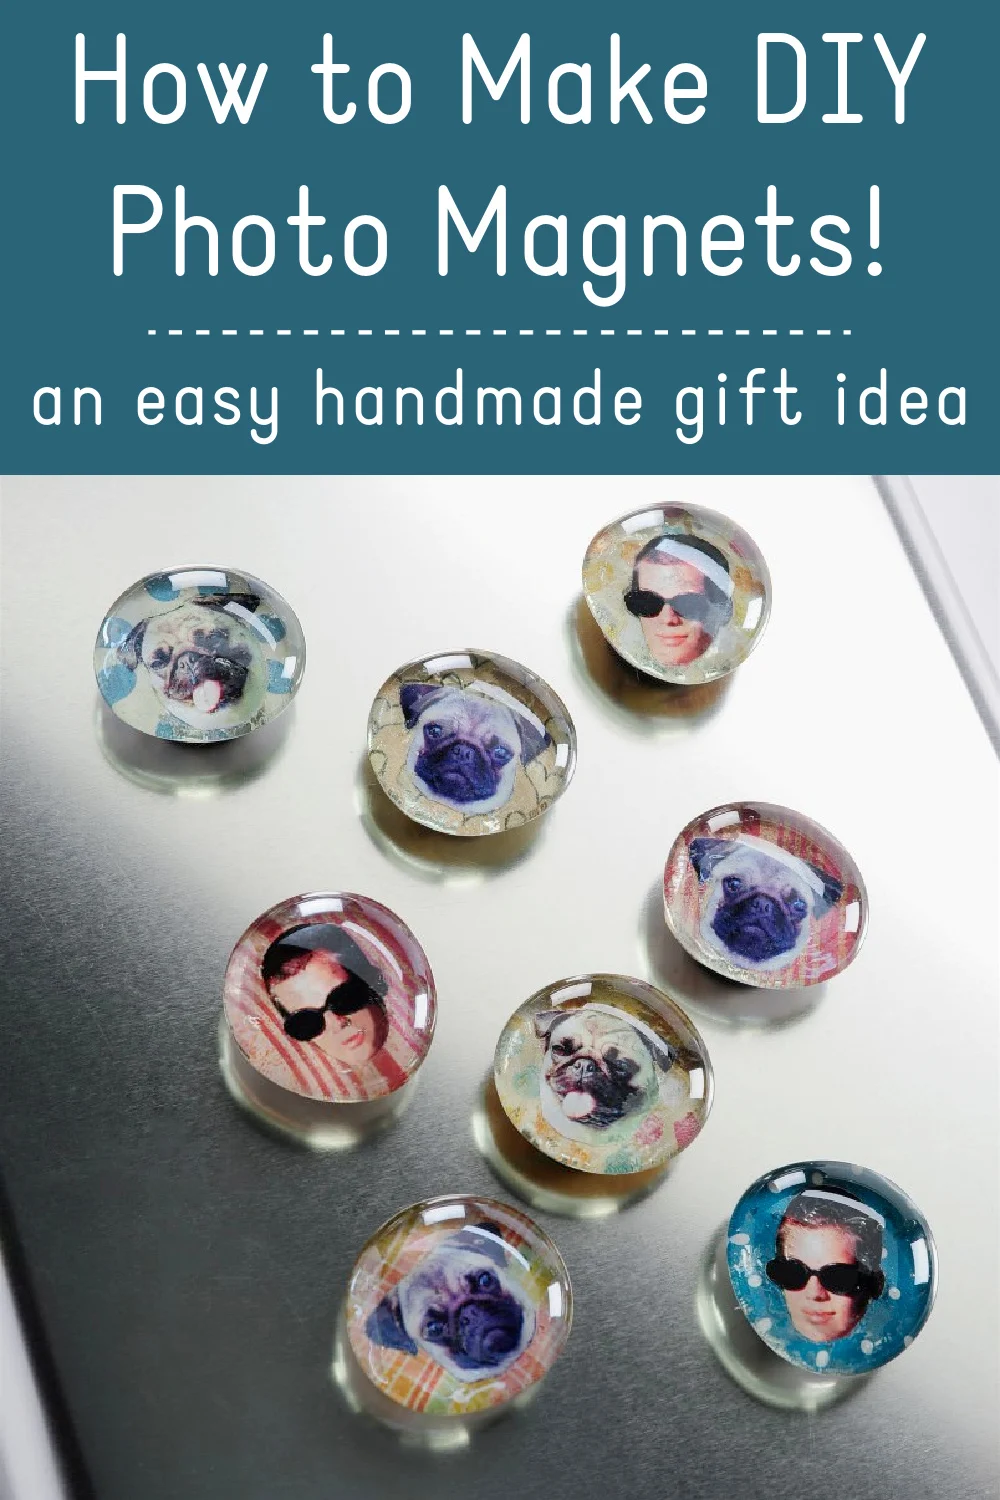 How to Make Photo Magnets